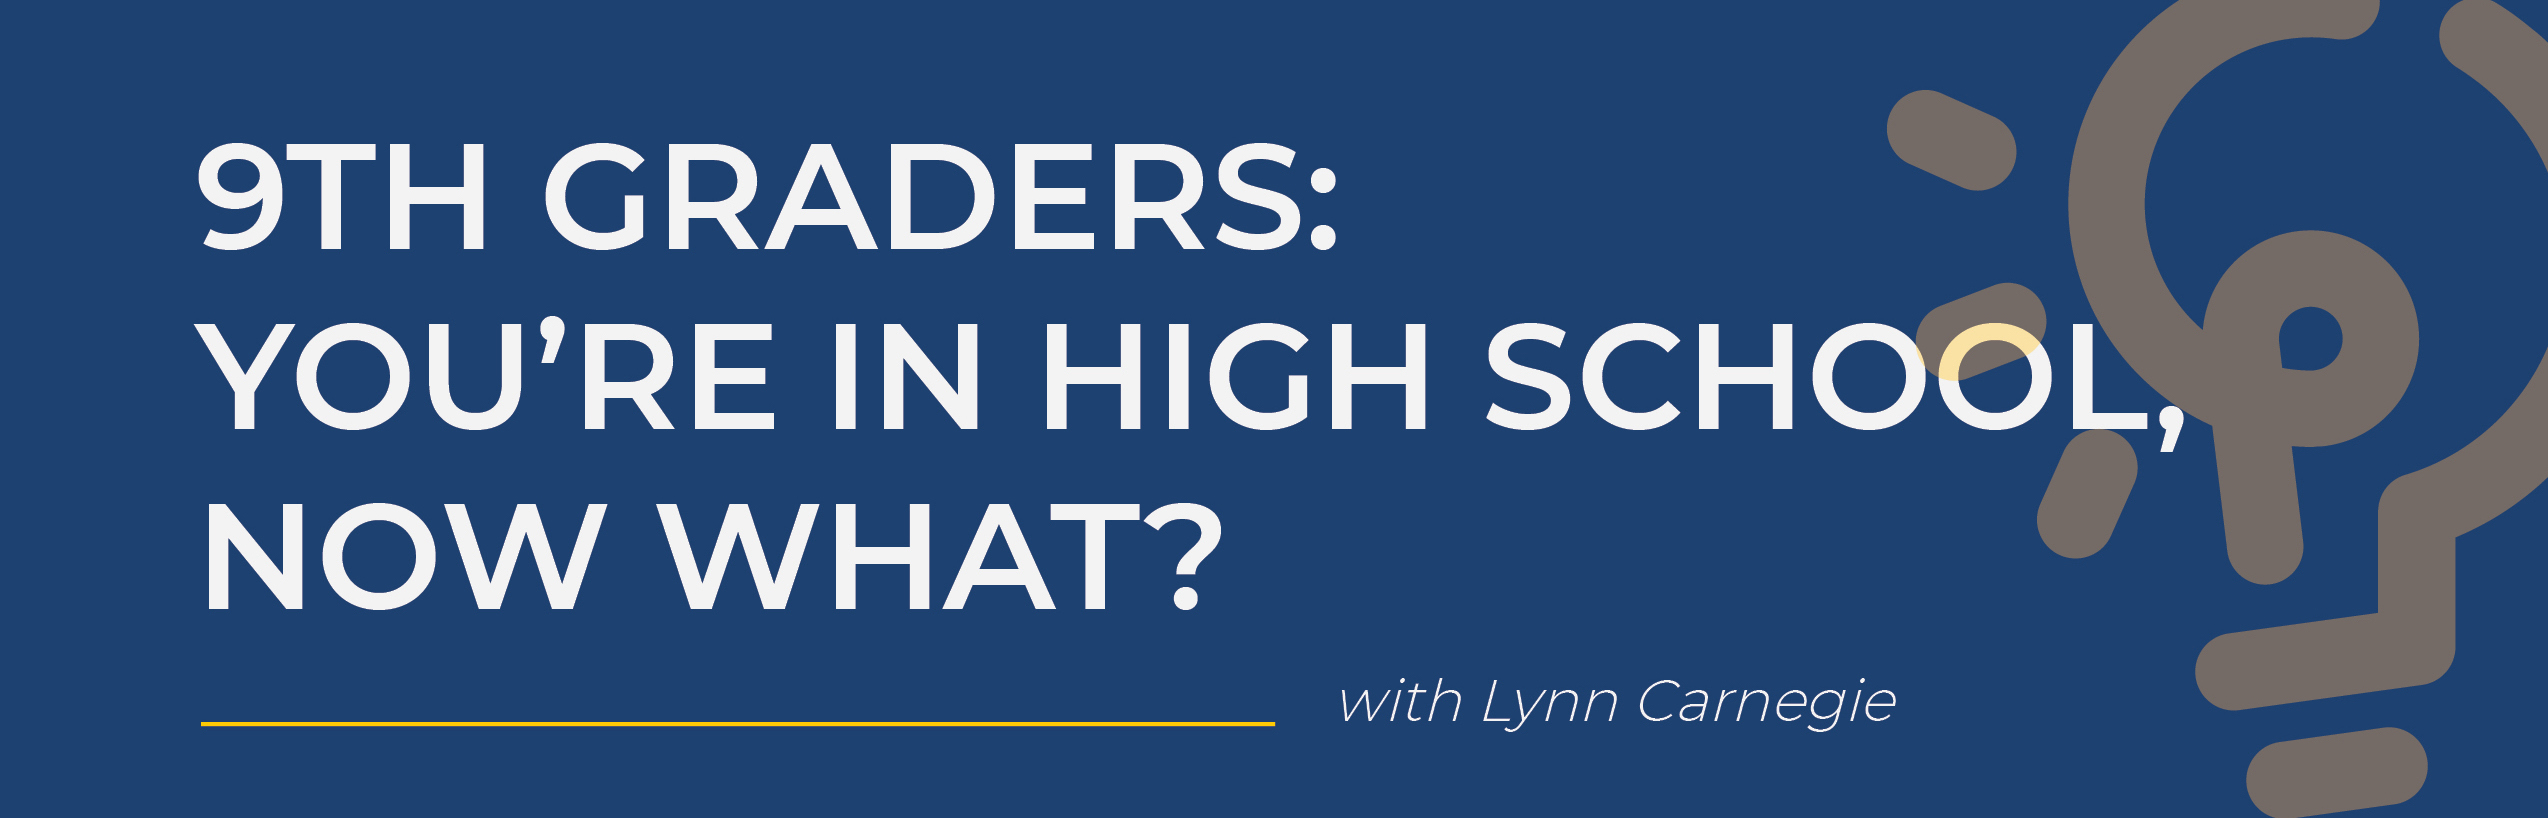 9th Graders: You’re In High School, Now What?